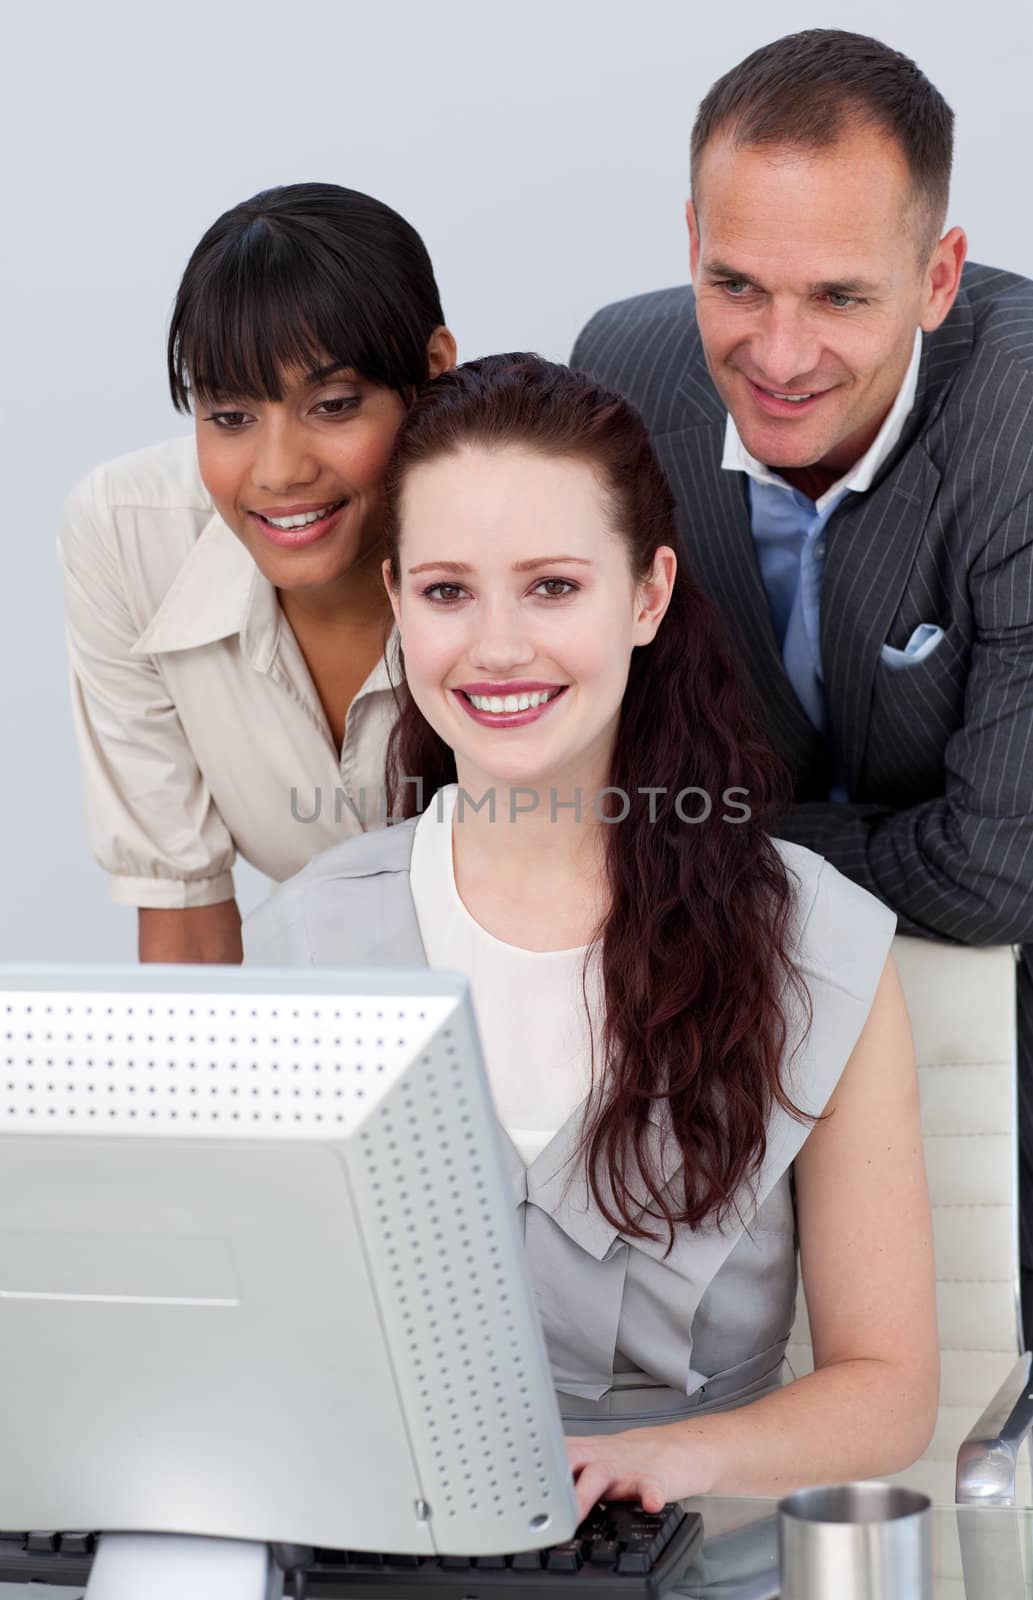 Smiling international Business people working together at a computer
